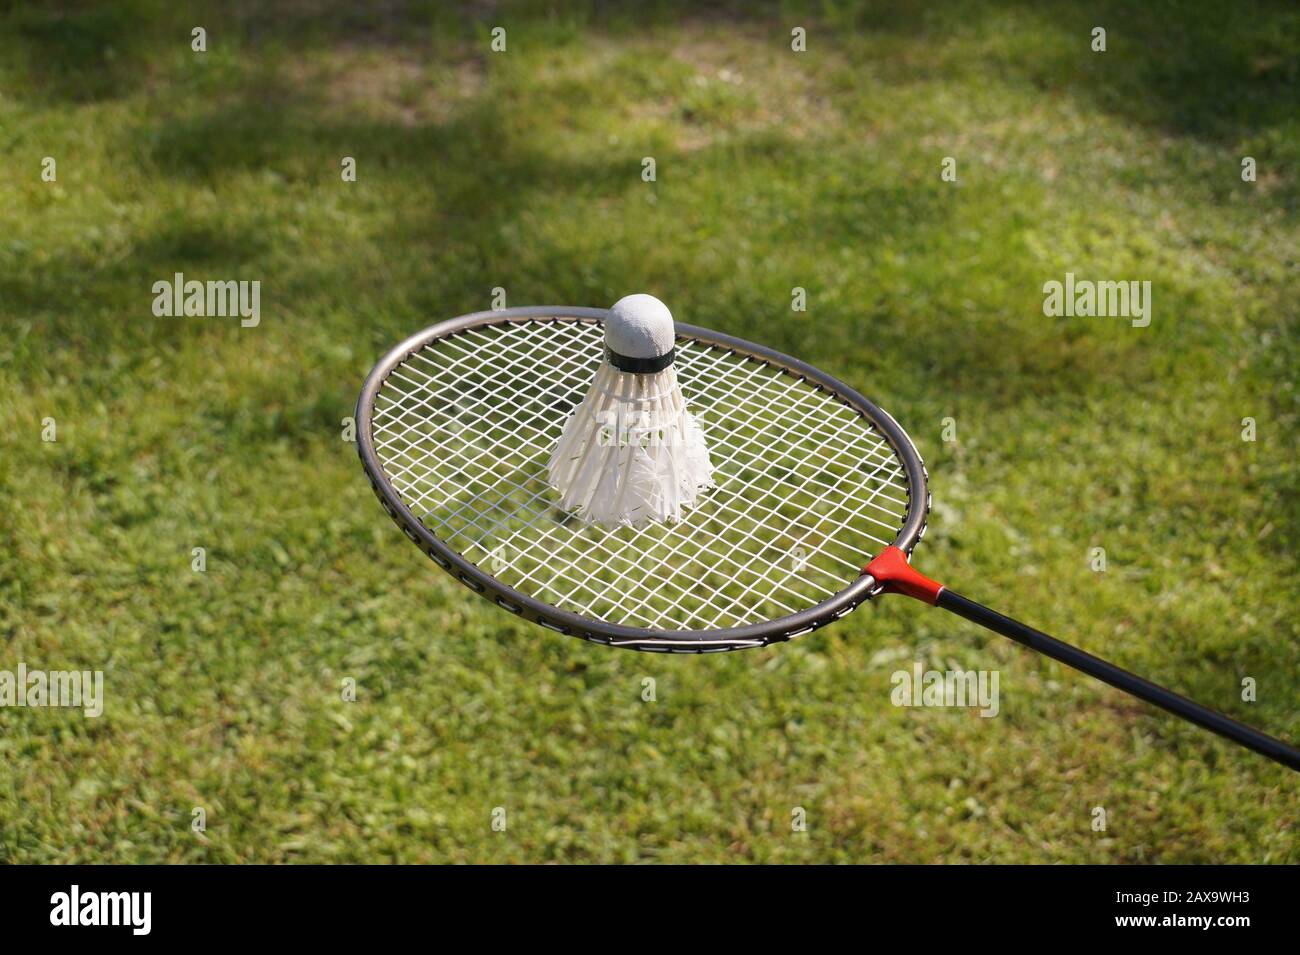 Green grassy playground background. Badminton racket with a shuttlecock made from goose feathers. Stock Photo